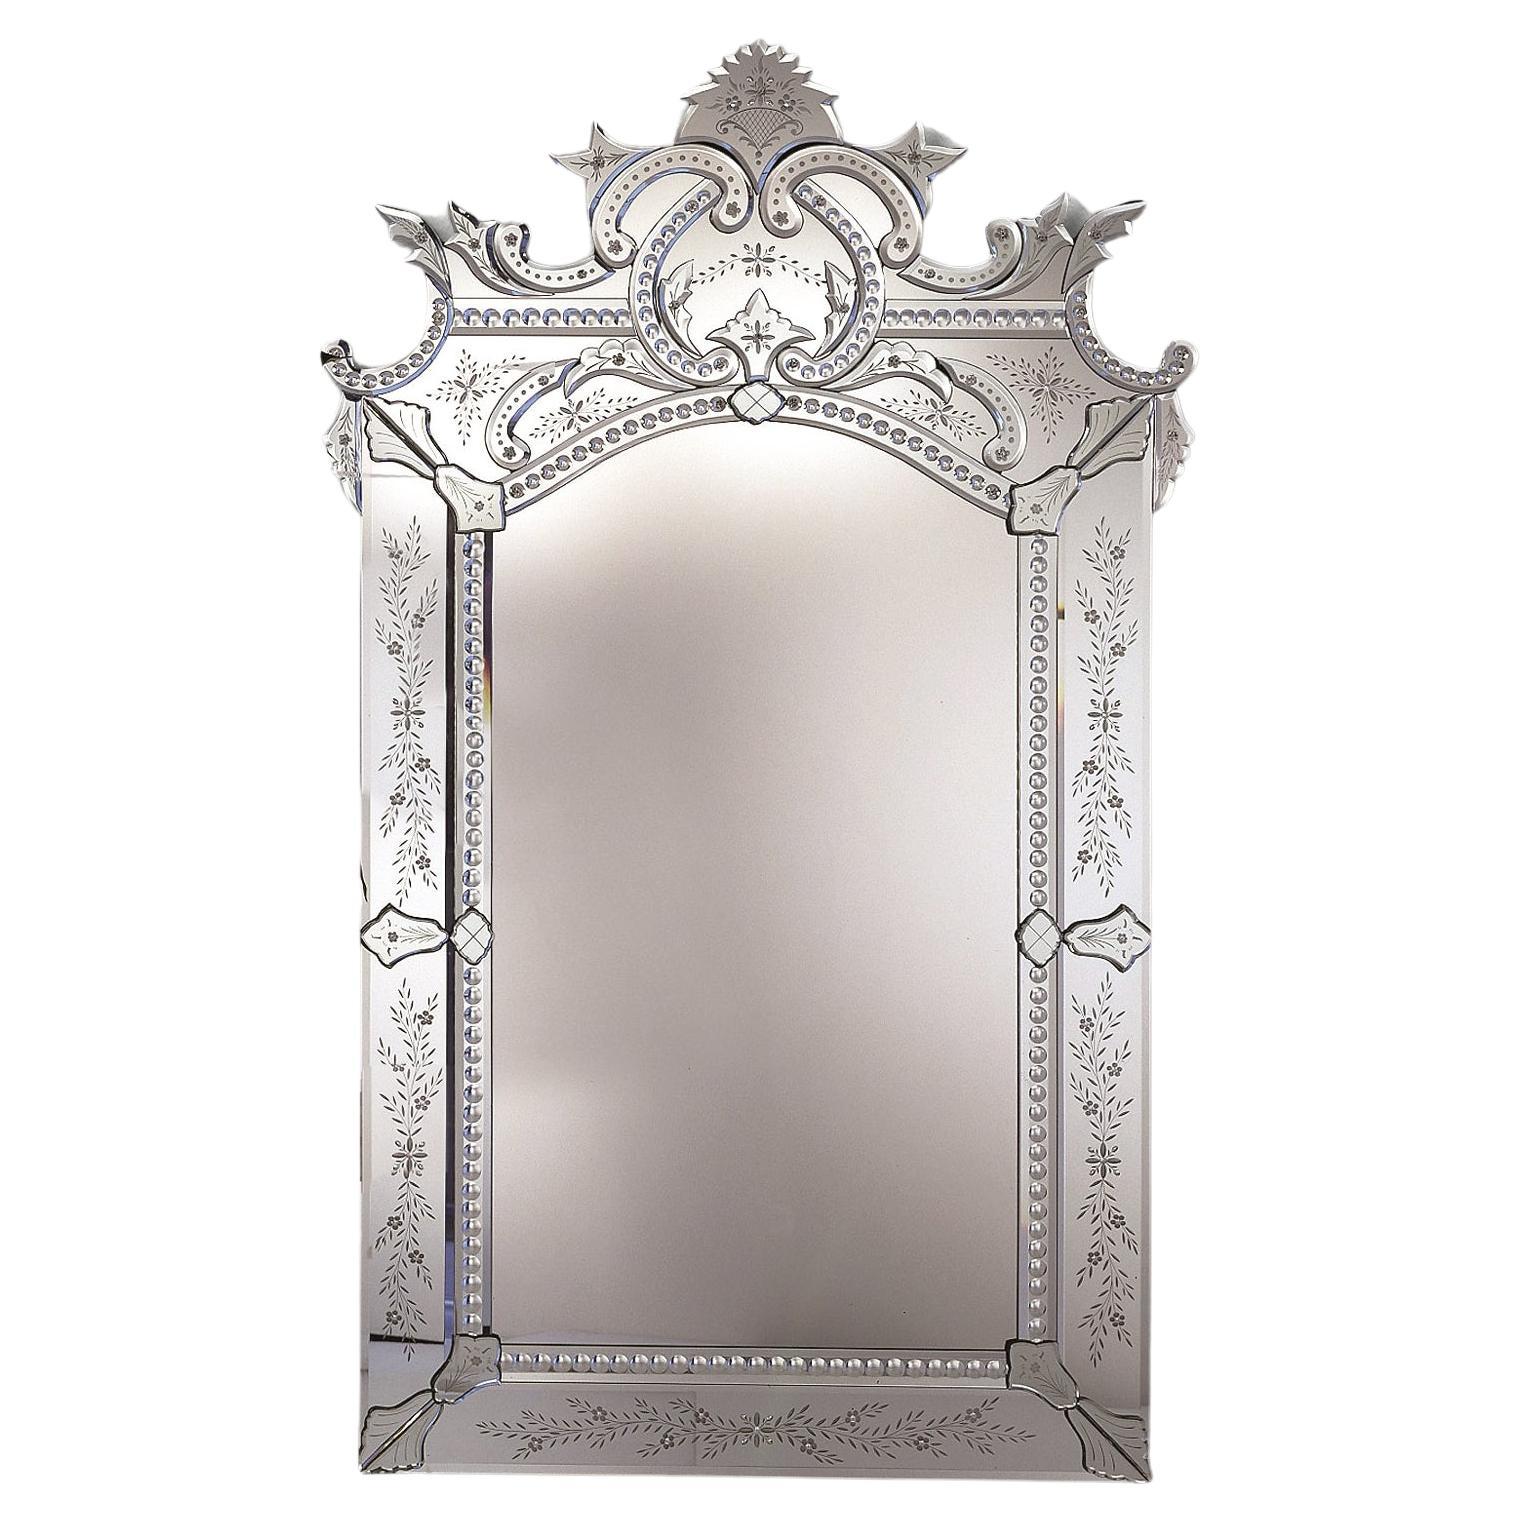 "Ca'Nilu" Murano Glass Mirror, 800 French Style by Fratelli Tosi